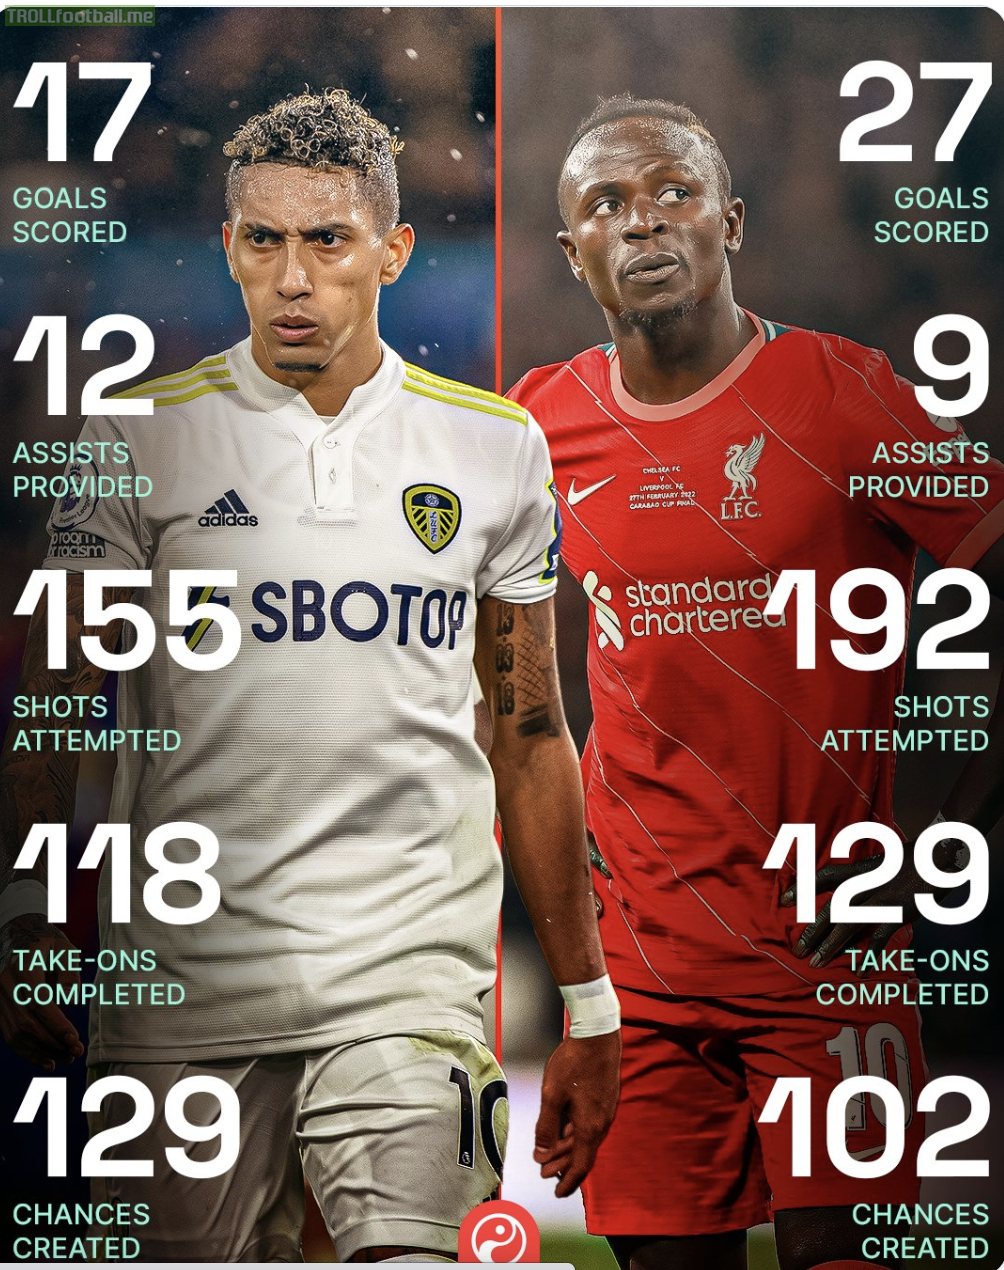 [Squawka] “Since the start of the 2020/21 season, only two players have attempted 100+ shots, created 100+ chances and completed 100+ take-ons in the Premier League: Mane and Raphina”